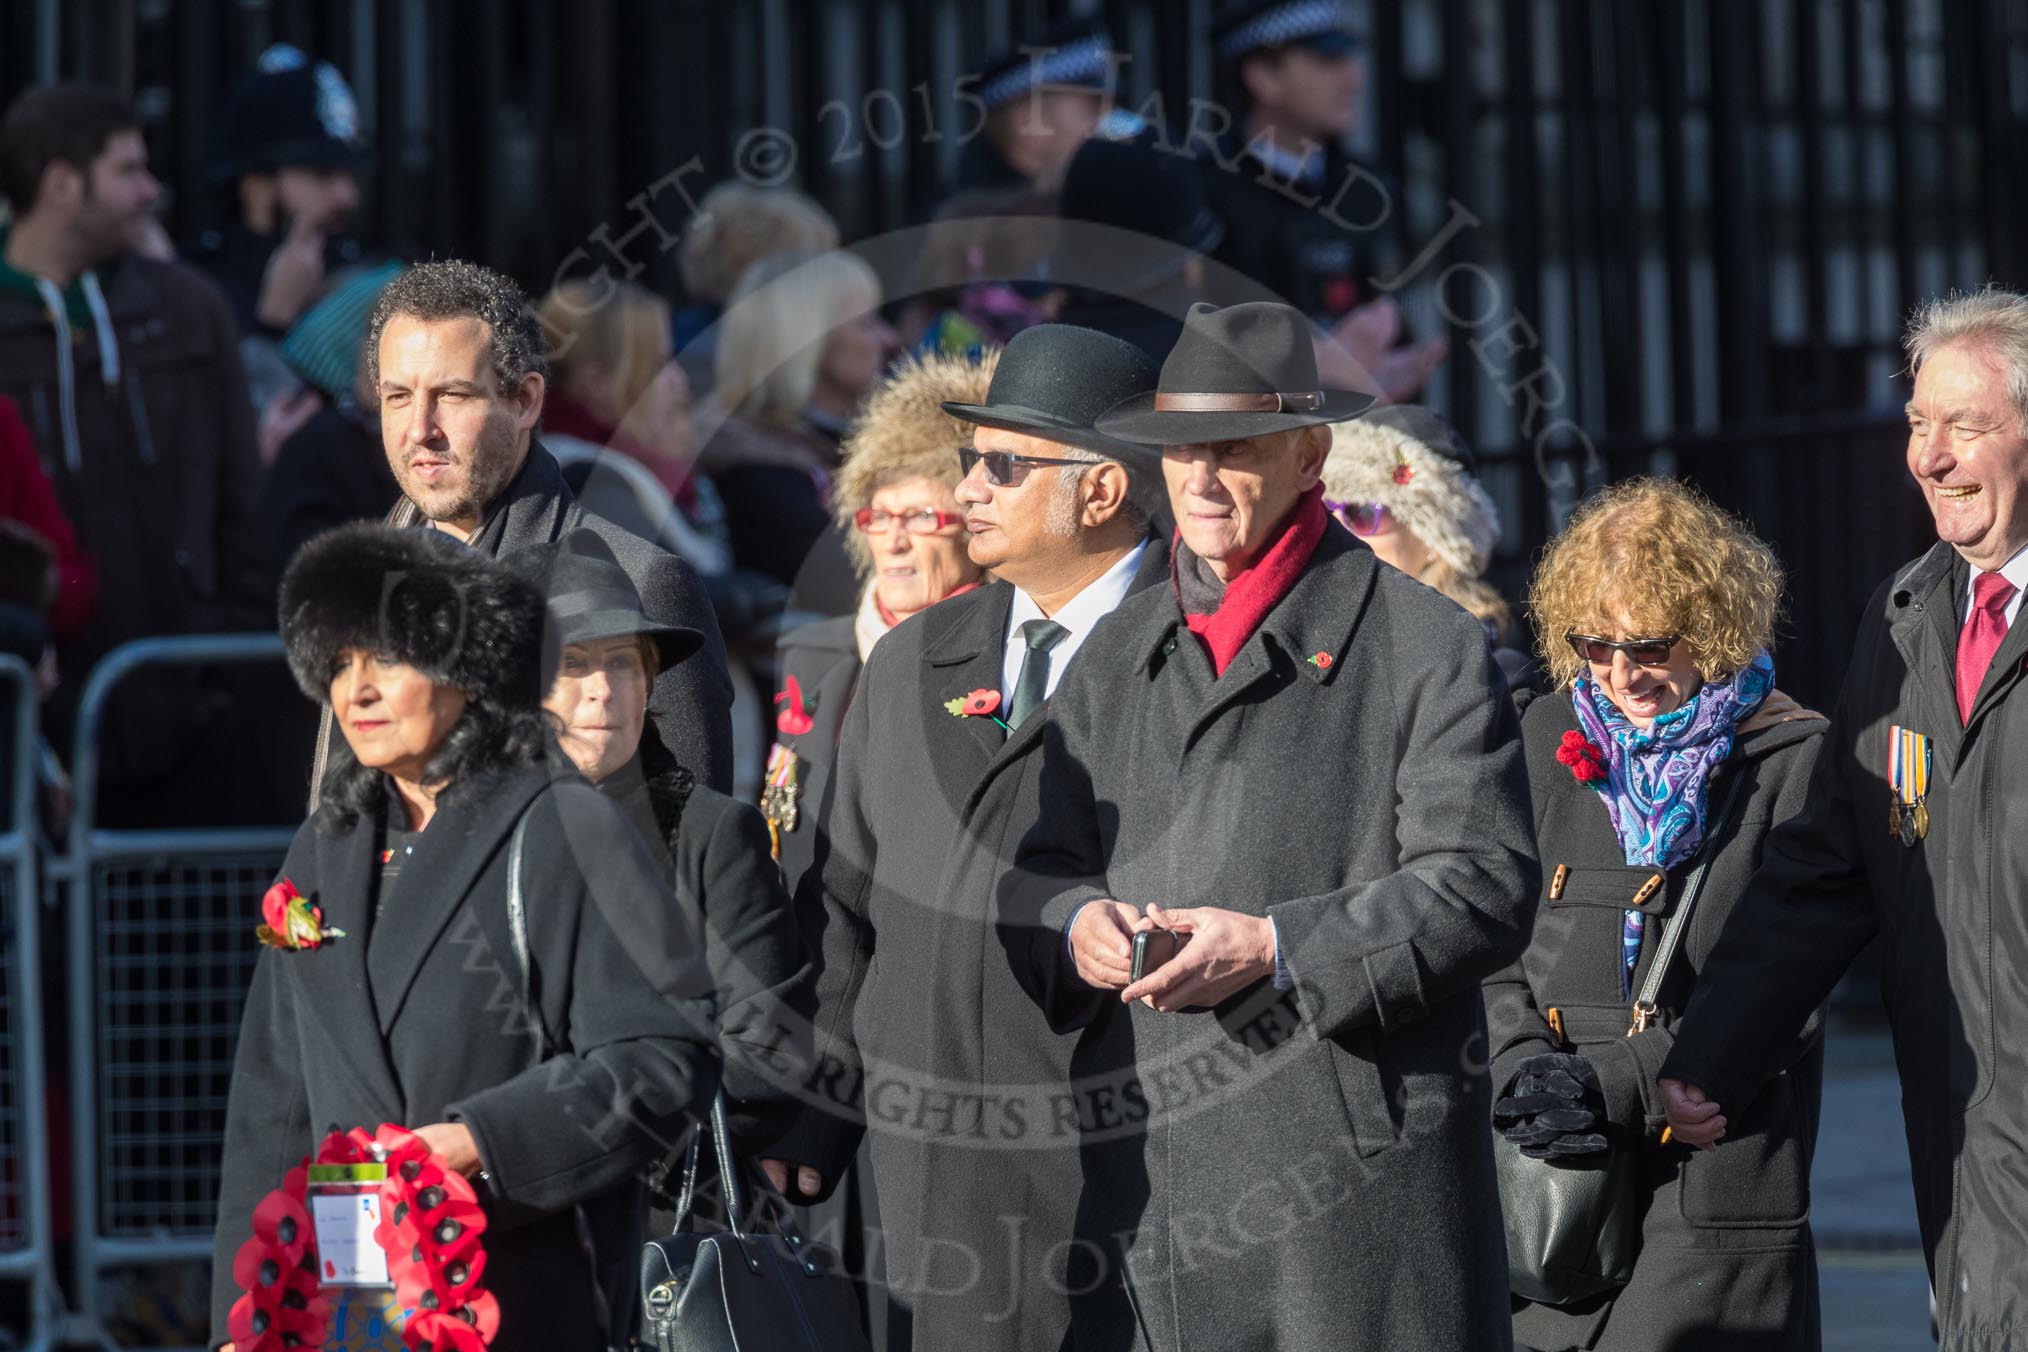 March Past, Remembrance Sunday at the Cenotaph 2016: M29 Rotary International.
Cenotaph, Whitehall, London SW1,
London,
Greater London,
United Kingdom,
on 13 November 2016 at 13:17, image #2759